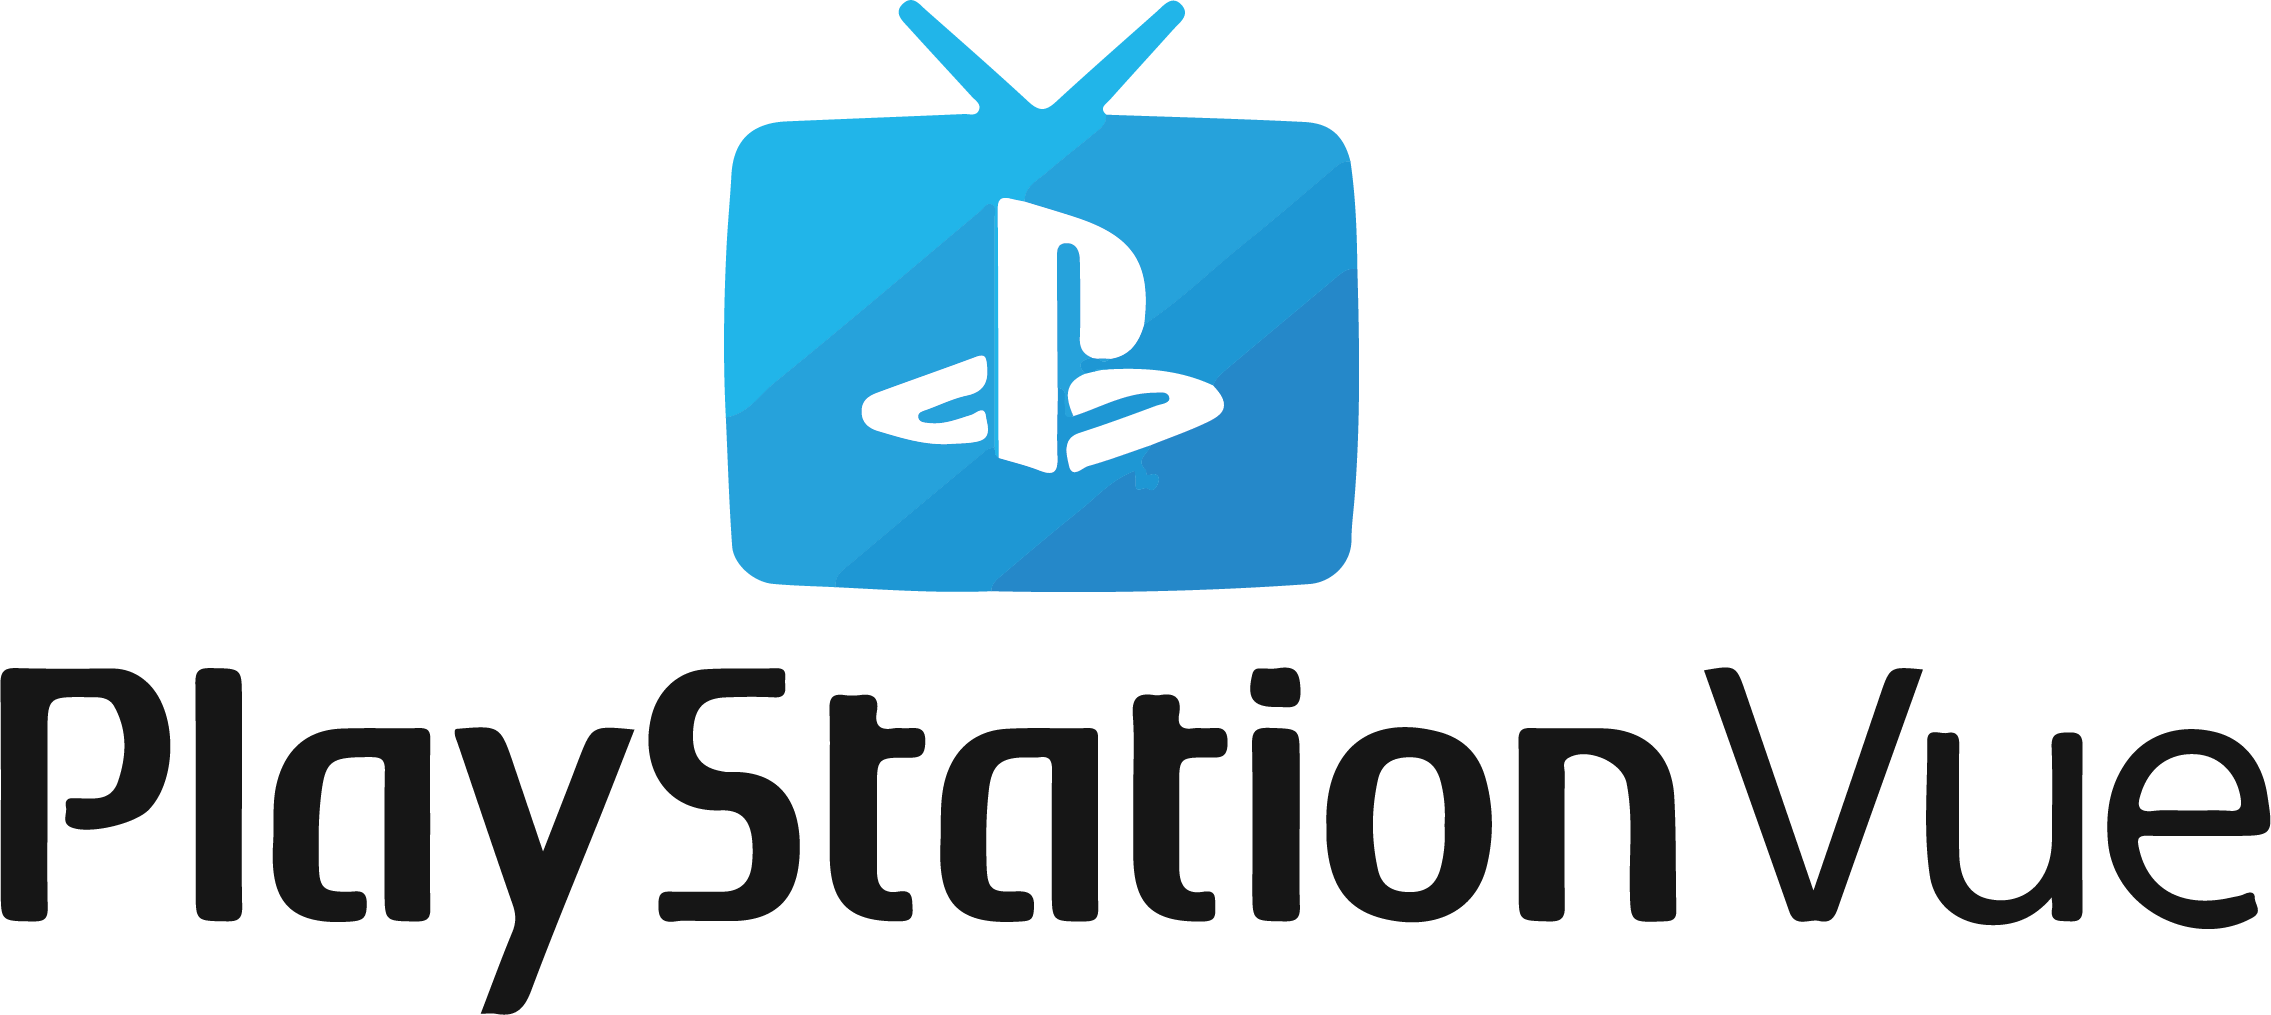 PlayStation Vue Logo - PlayStation Vue Channels [Lineup and Packages]